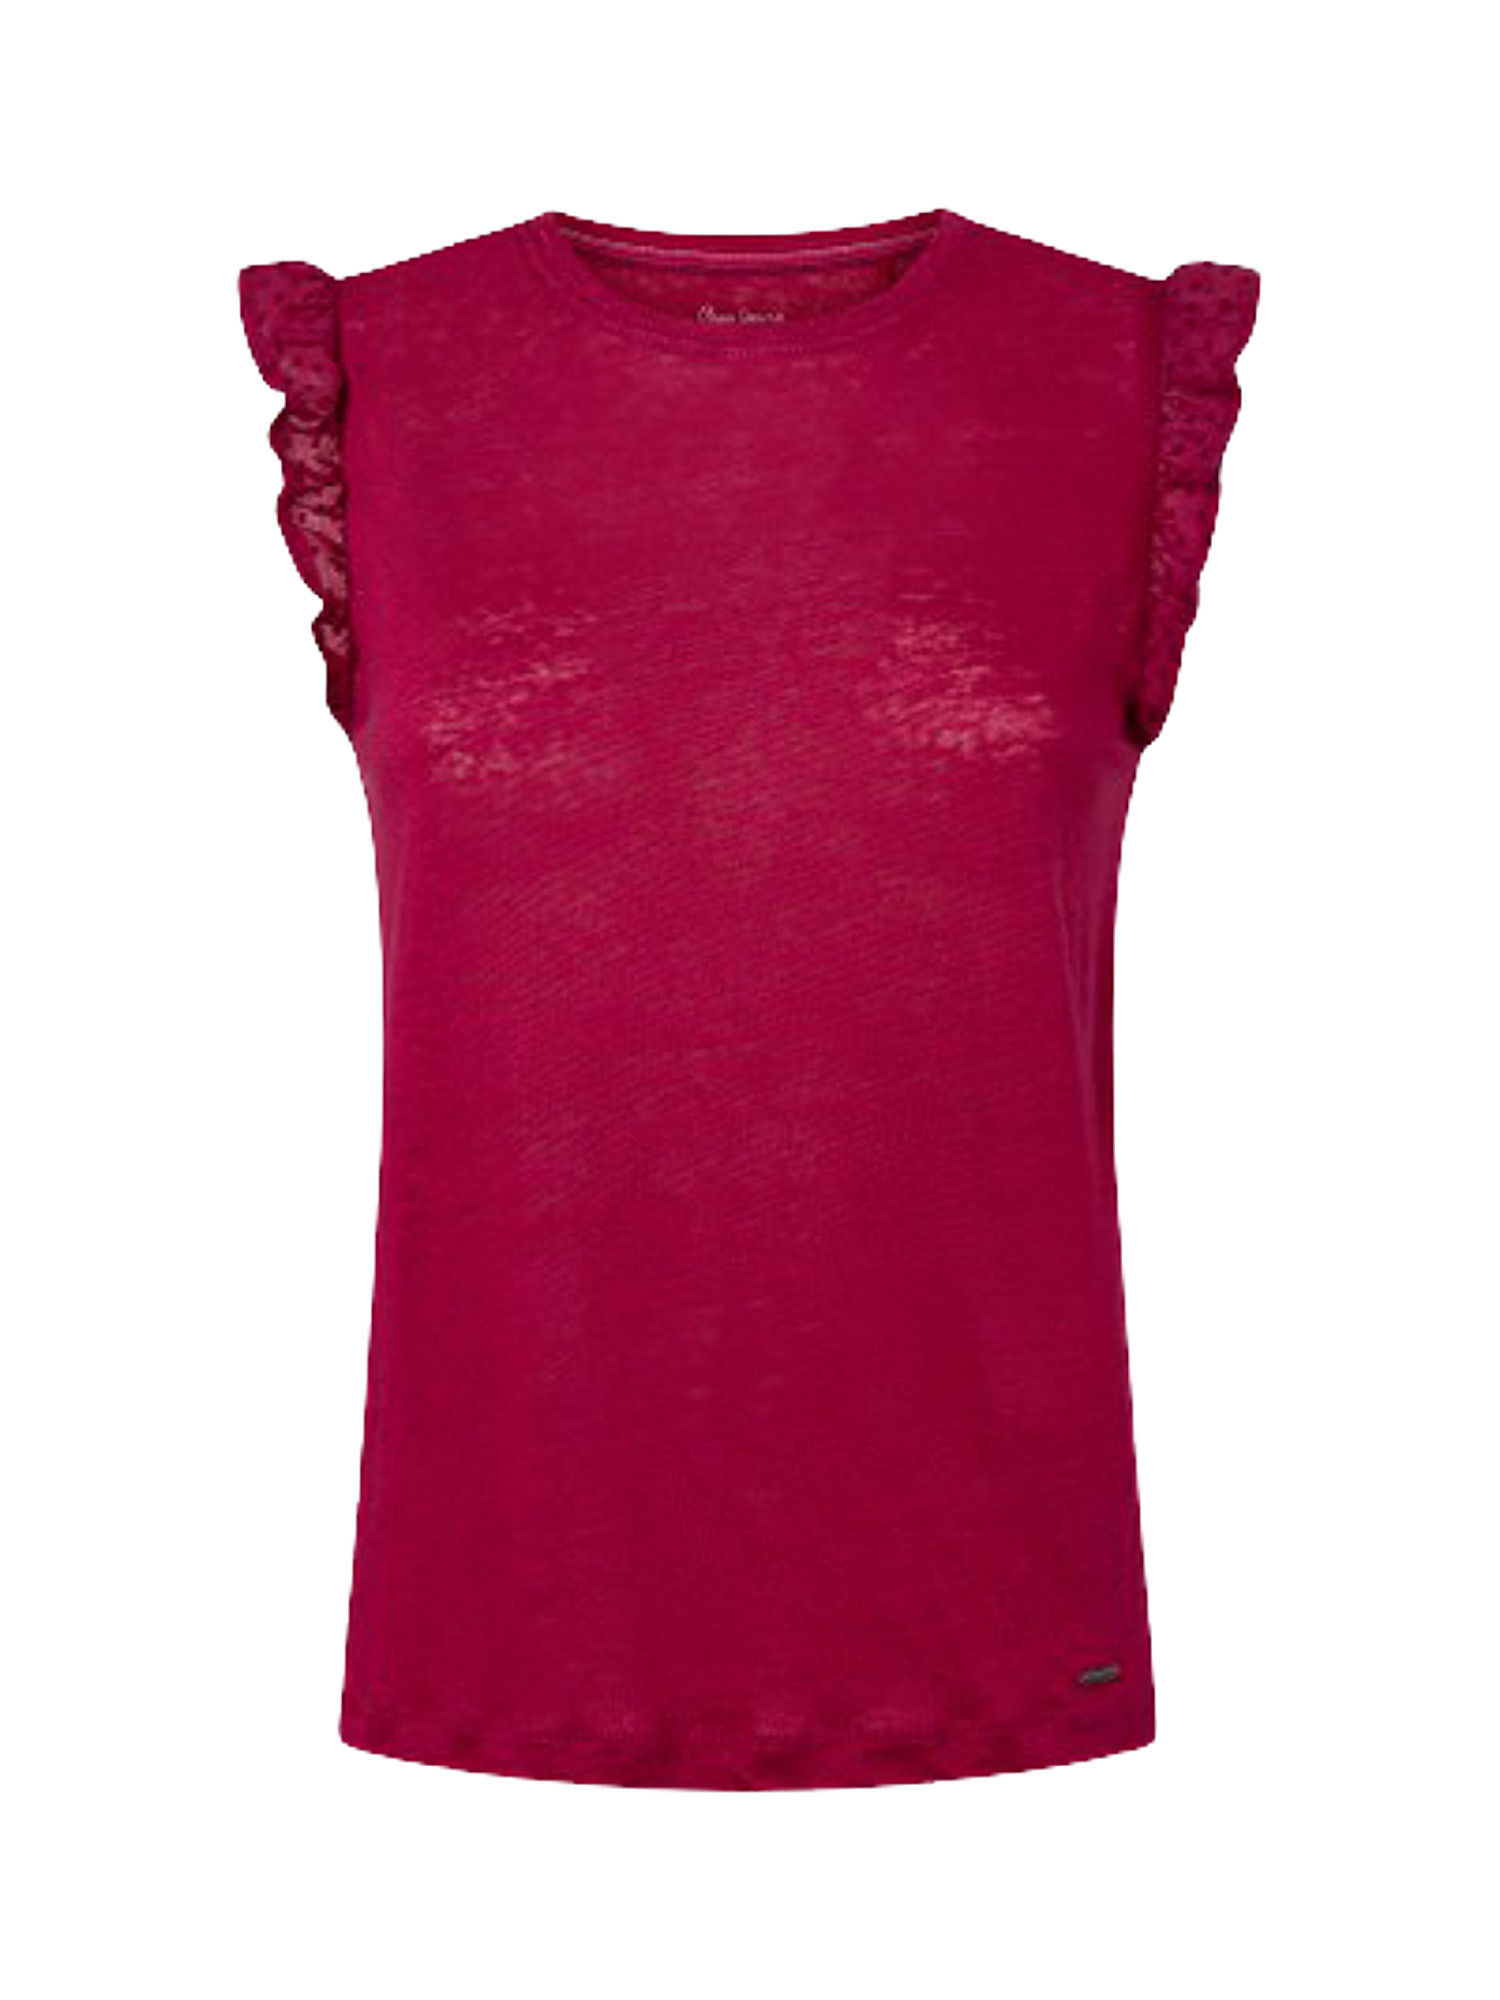 T-shirt con volant daysies, Rosa fuxia, large